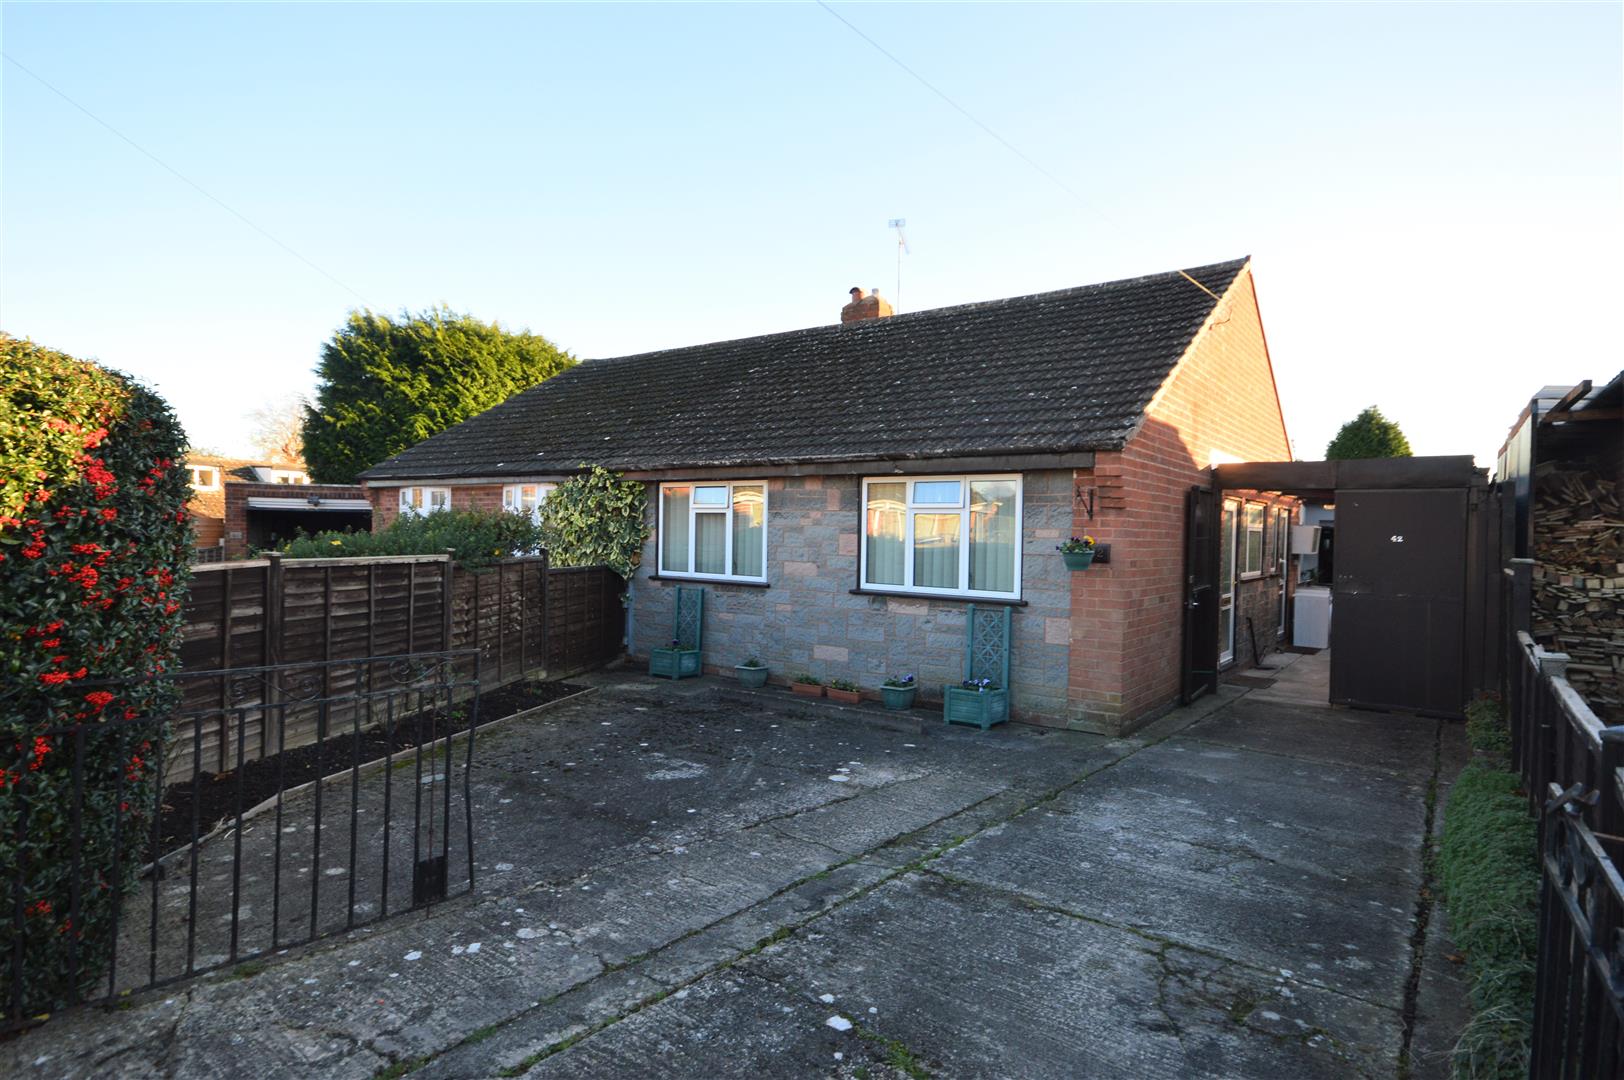 2 bed semi-detached bungalow for sale in Leominster - Property Image 1